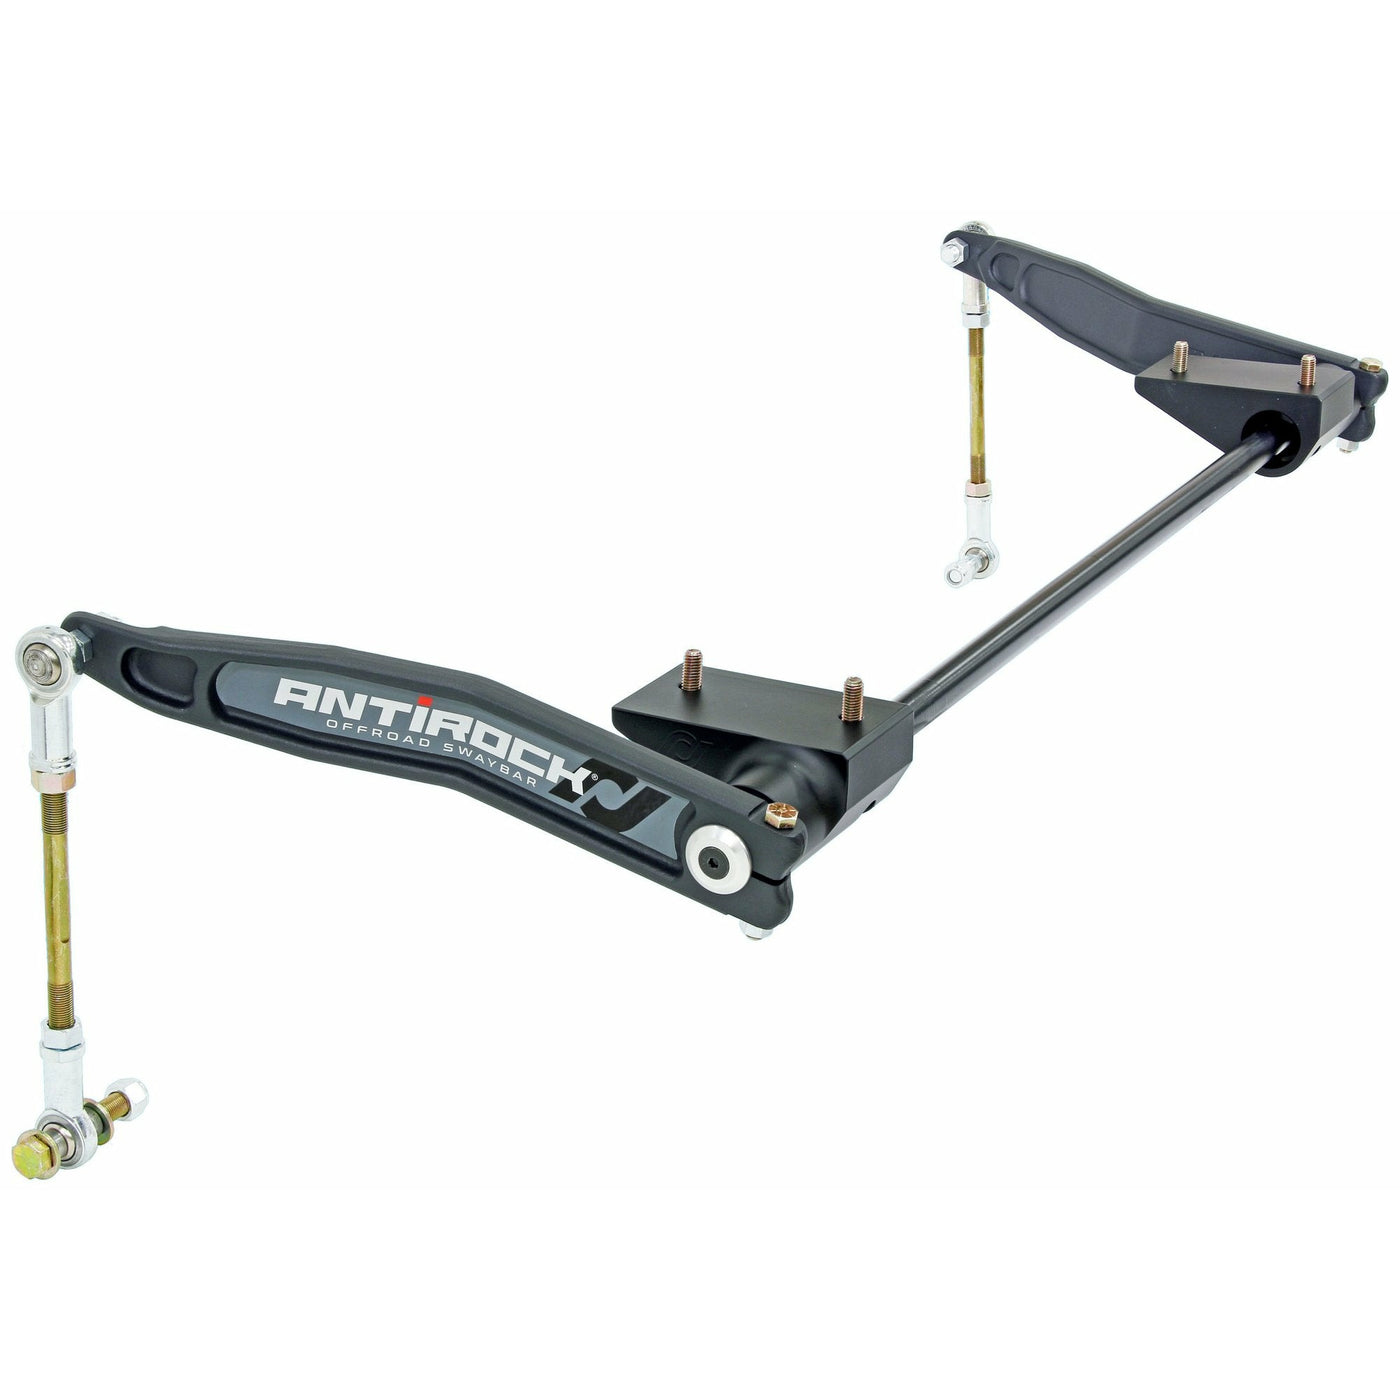 RockJock Front Anti-Rock Sway Bar Kit with Forged Arms for 18-22 Jeep Wrangler JL & Gladiator JT